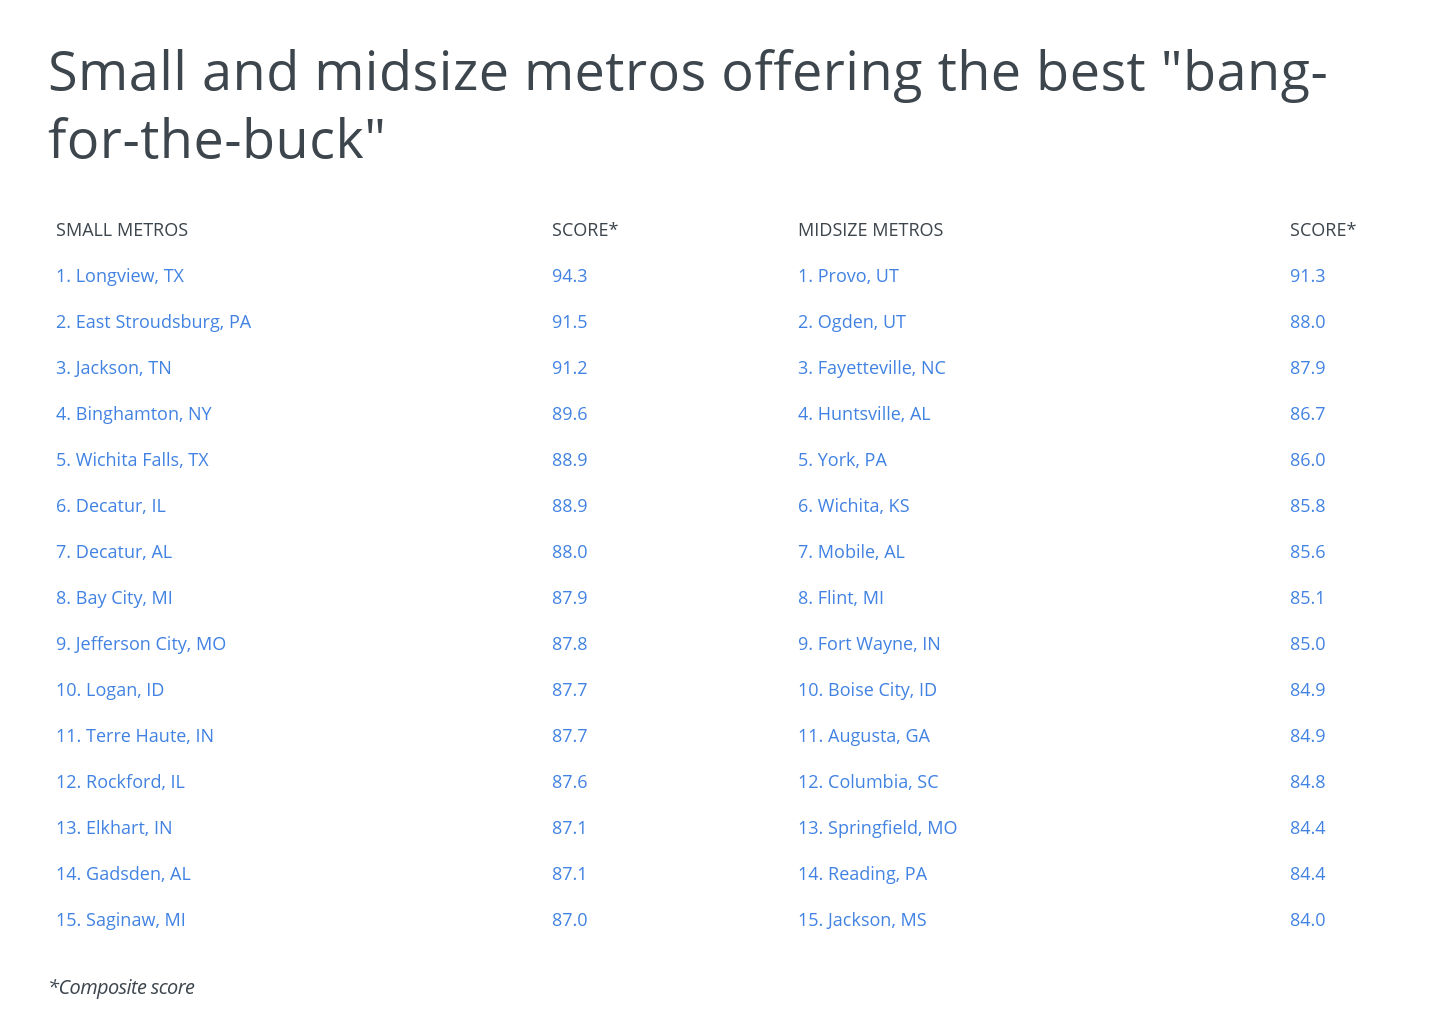 Small and midsize metros offering the best "bang-for-the-buck"